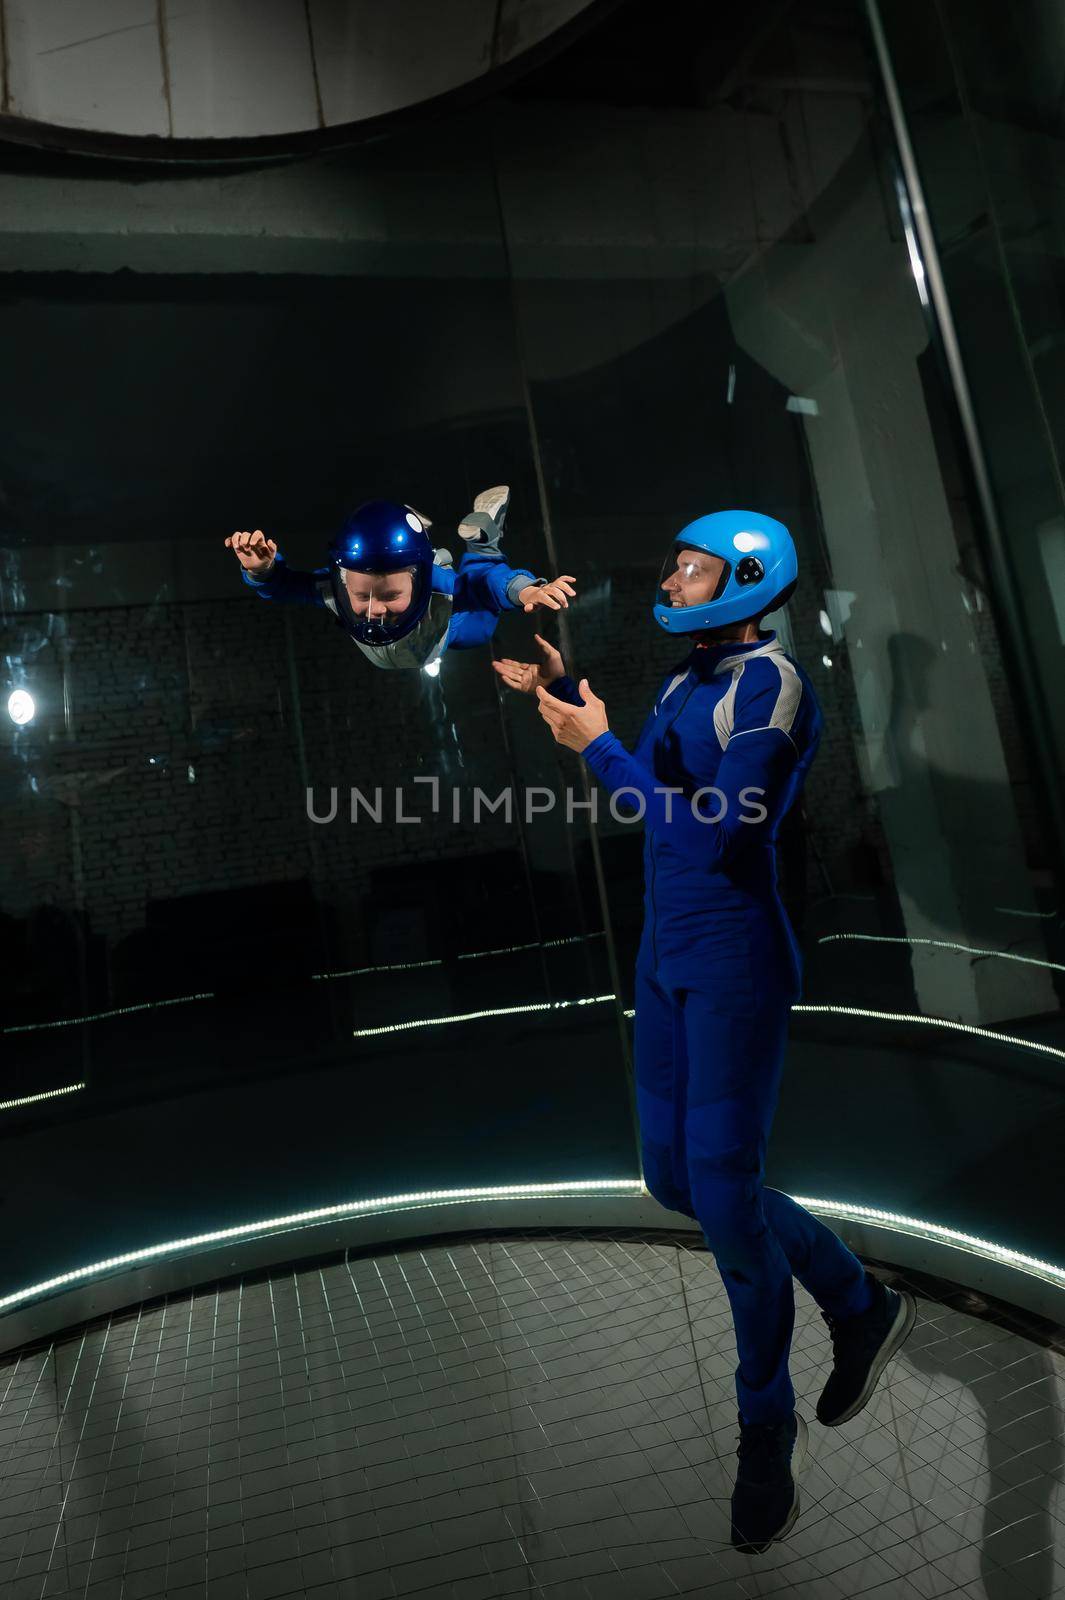 A man teaches a boy to fly in a wind tunnel. Lack of gravity. by mrwed54